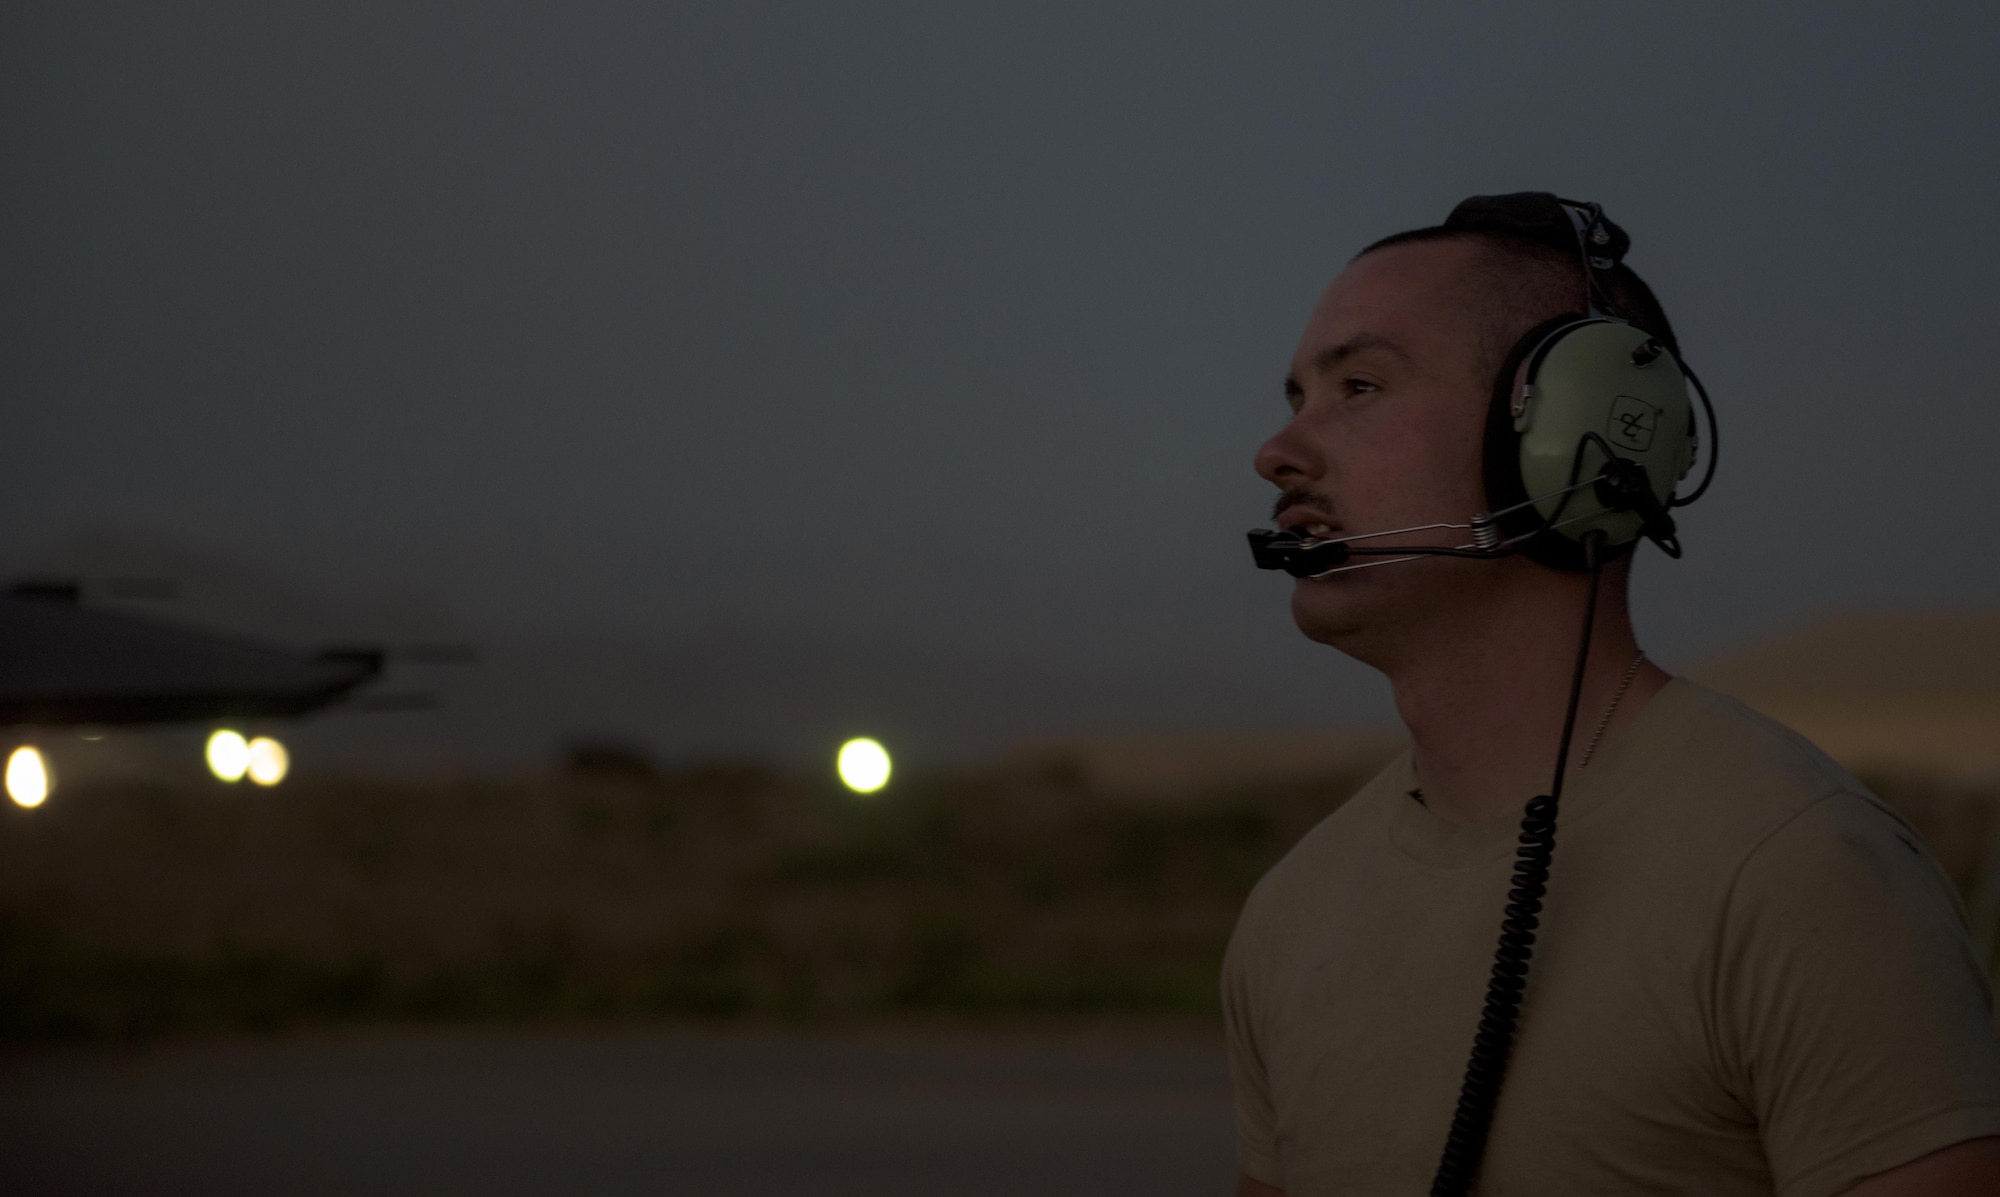 Senior Airman Kyle Bieri, a 455th Expeditionary Aircraft Maintenance Squadron aerospace propulsion technician, communicates with a team member during an F-16 Fighting Falcon afterburner run at Bagram Airfield, Afghanistan, June 16, 2017. Bieri is deployed out of Aviano Air Base, Italy, and supports the F-16 Fighting Falcons assigned to the 555th Expeditionary Fighter Squadron. (U.S. Air Force photo by Staff Sgt. Benjamin Gonsier) 